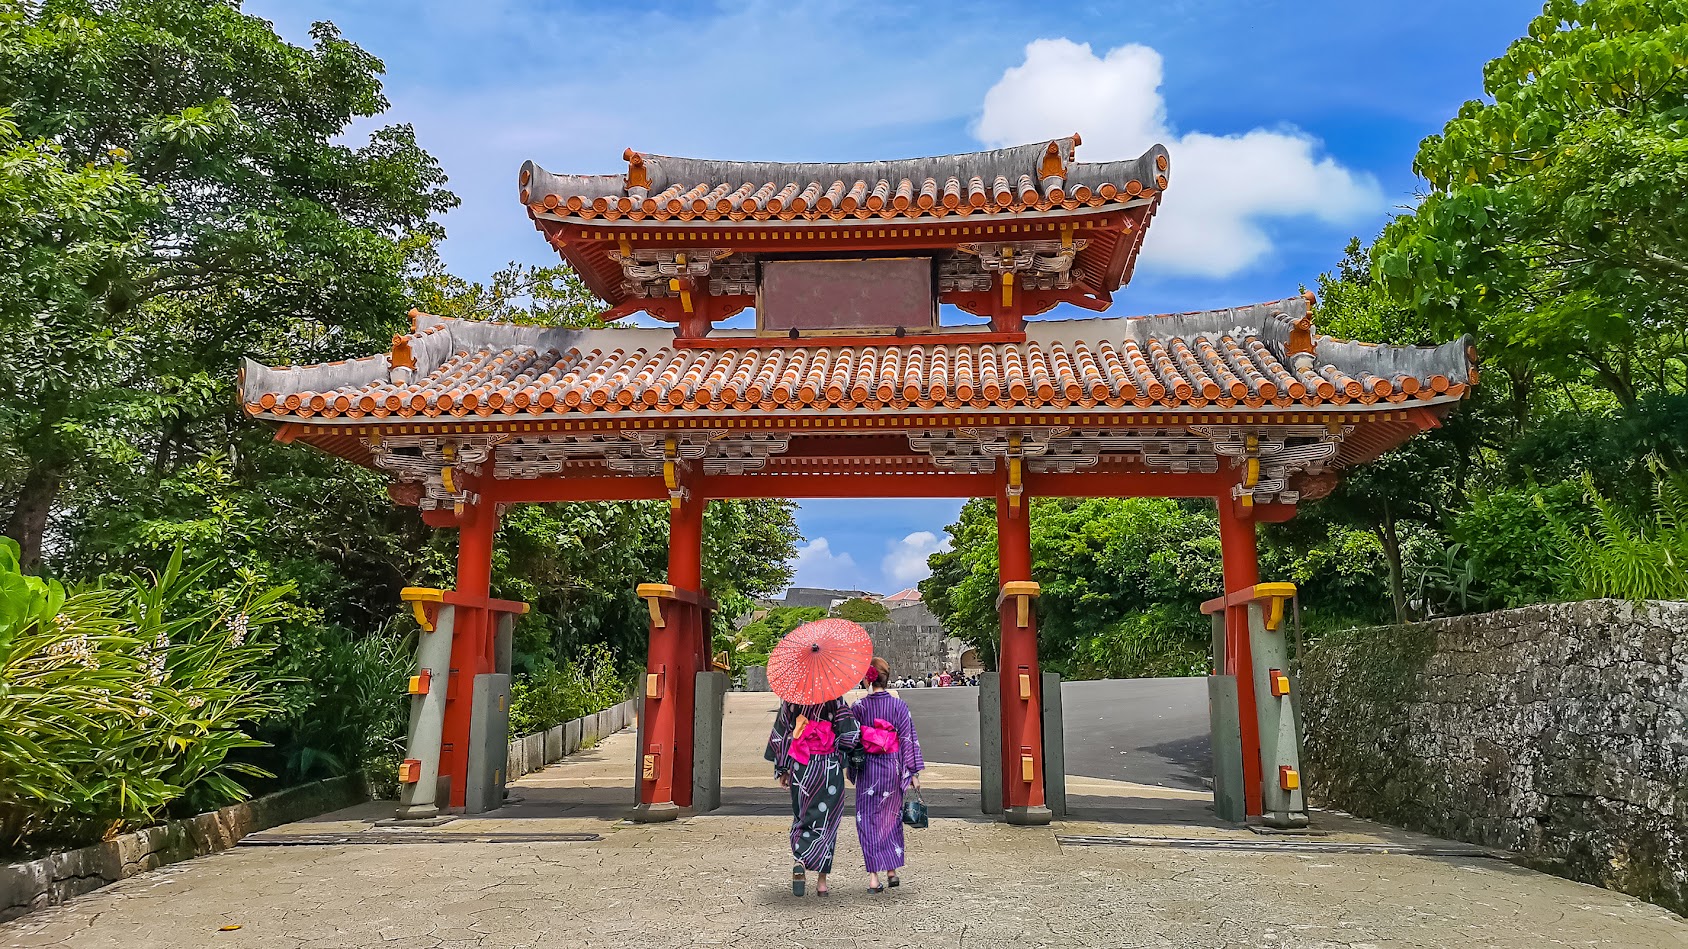 Walking tour of Okinawa's finest attractions